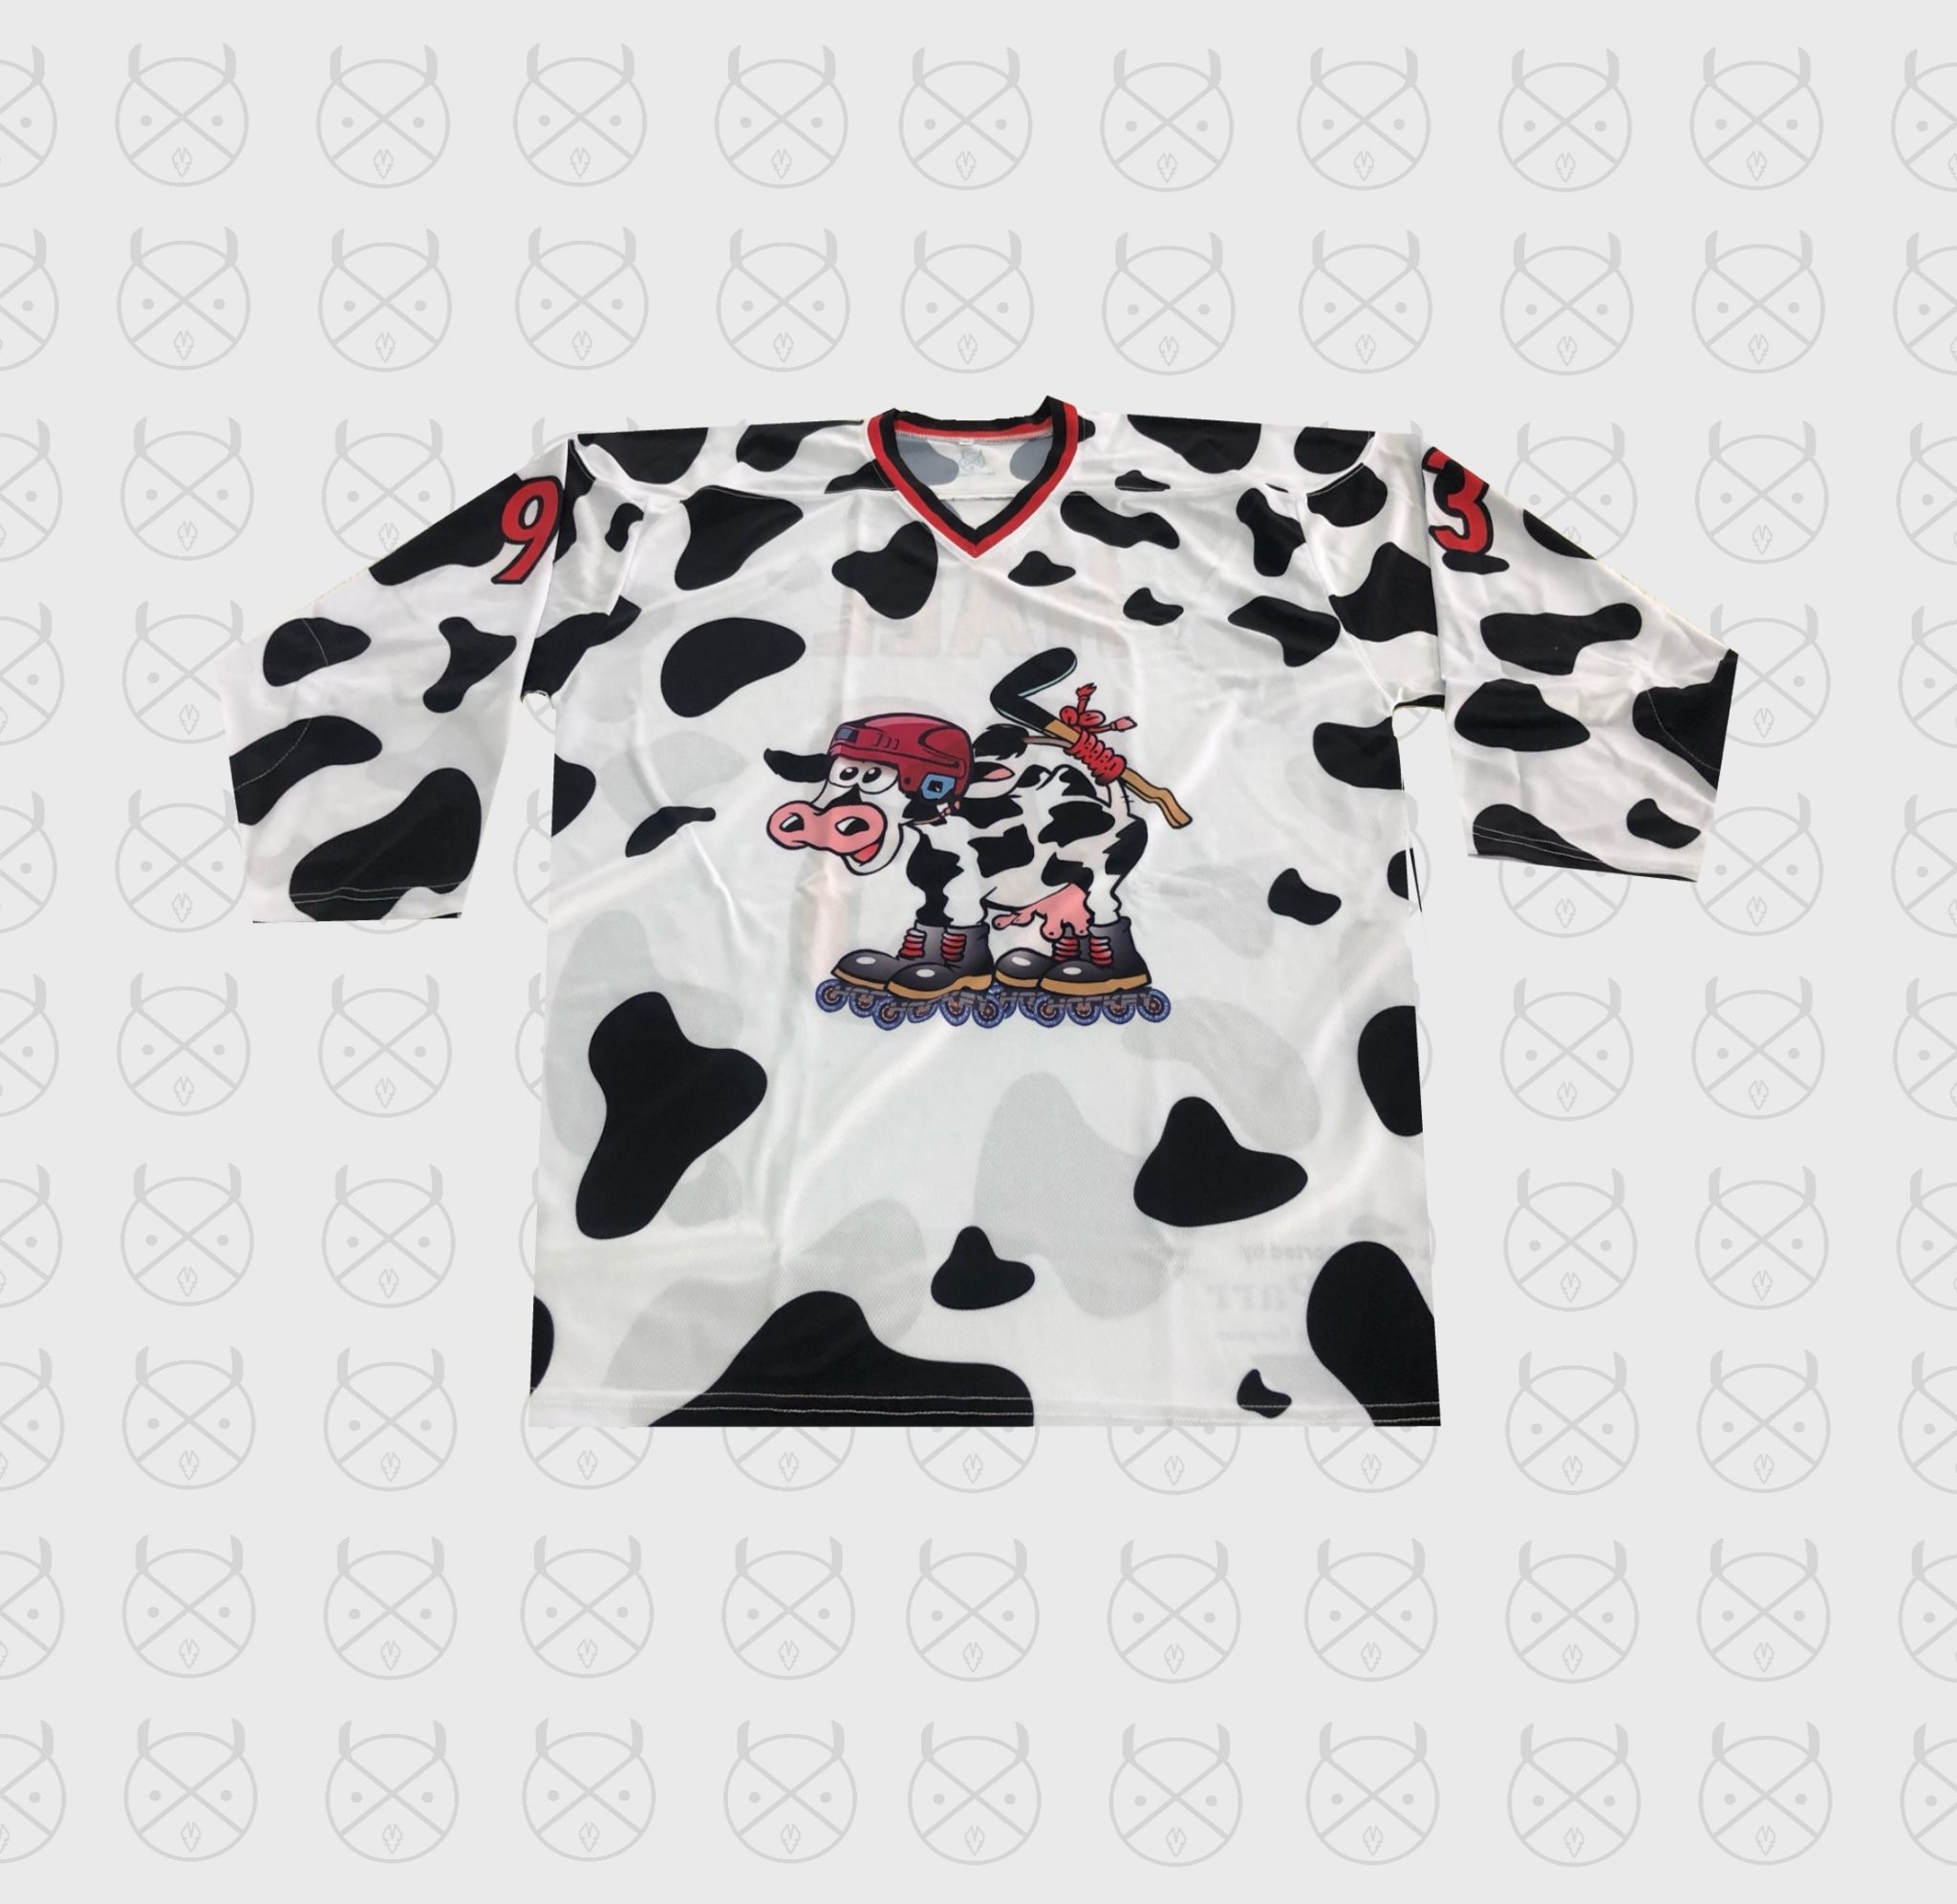 THE-UDDERS-Jersey-front-scaled-1.jpg